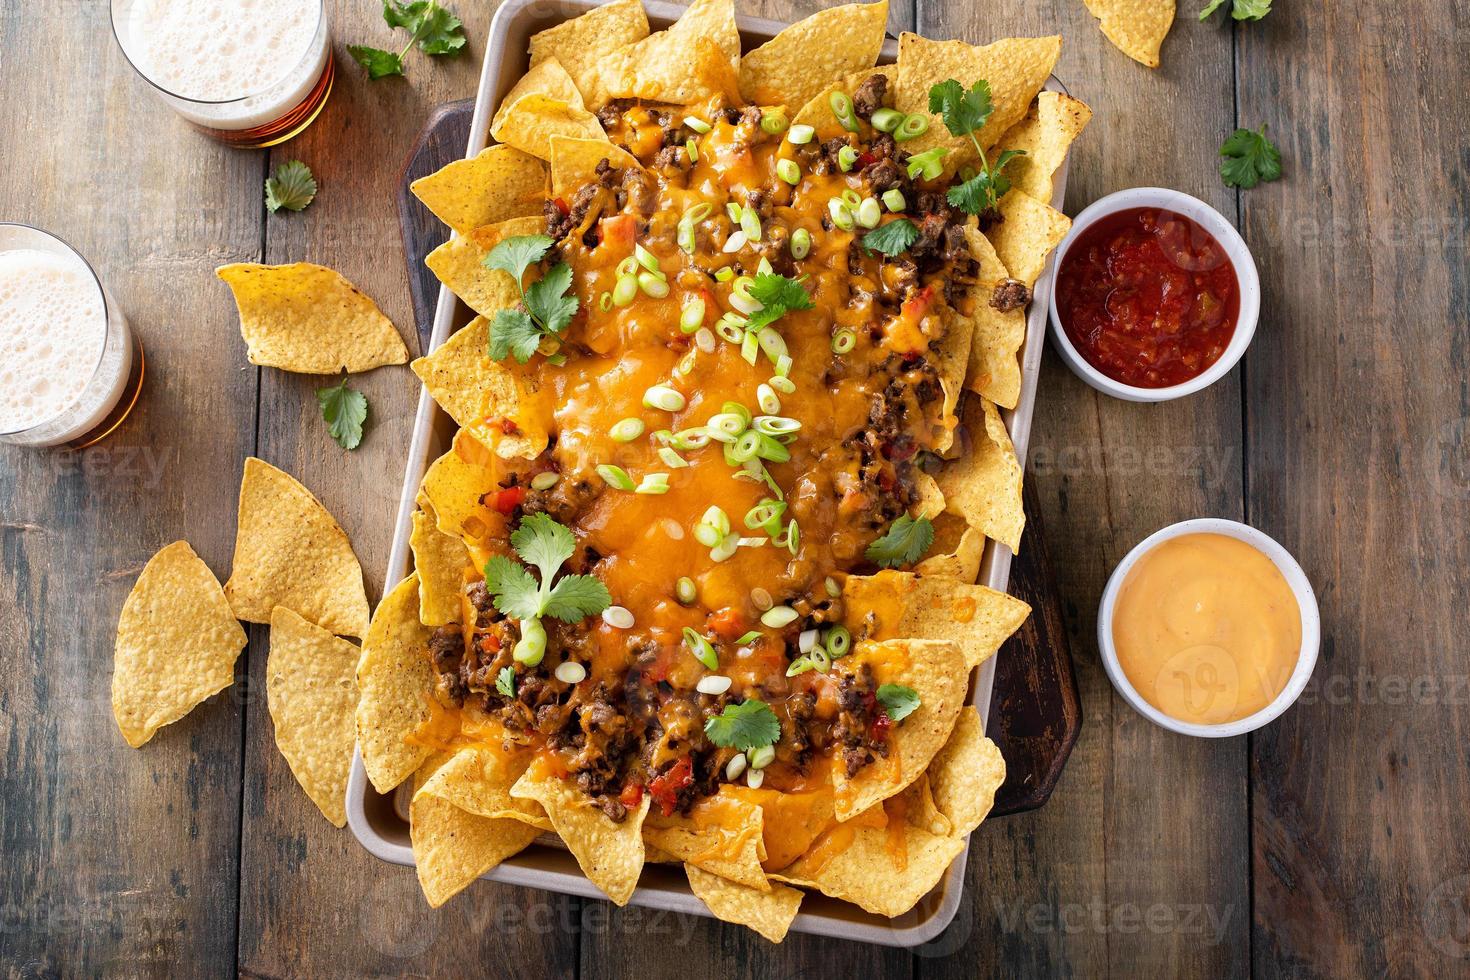 Traditional nachos with ground beef and red pepper photo